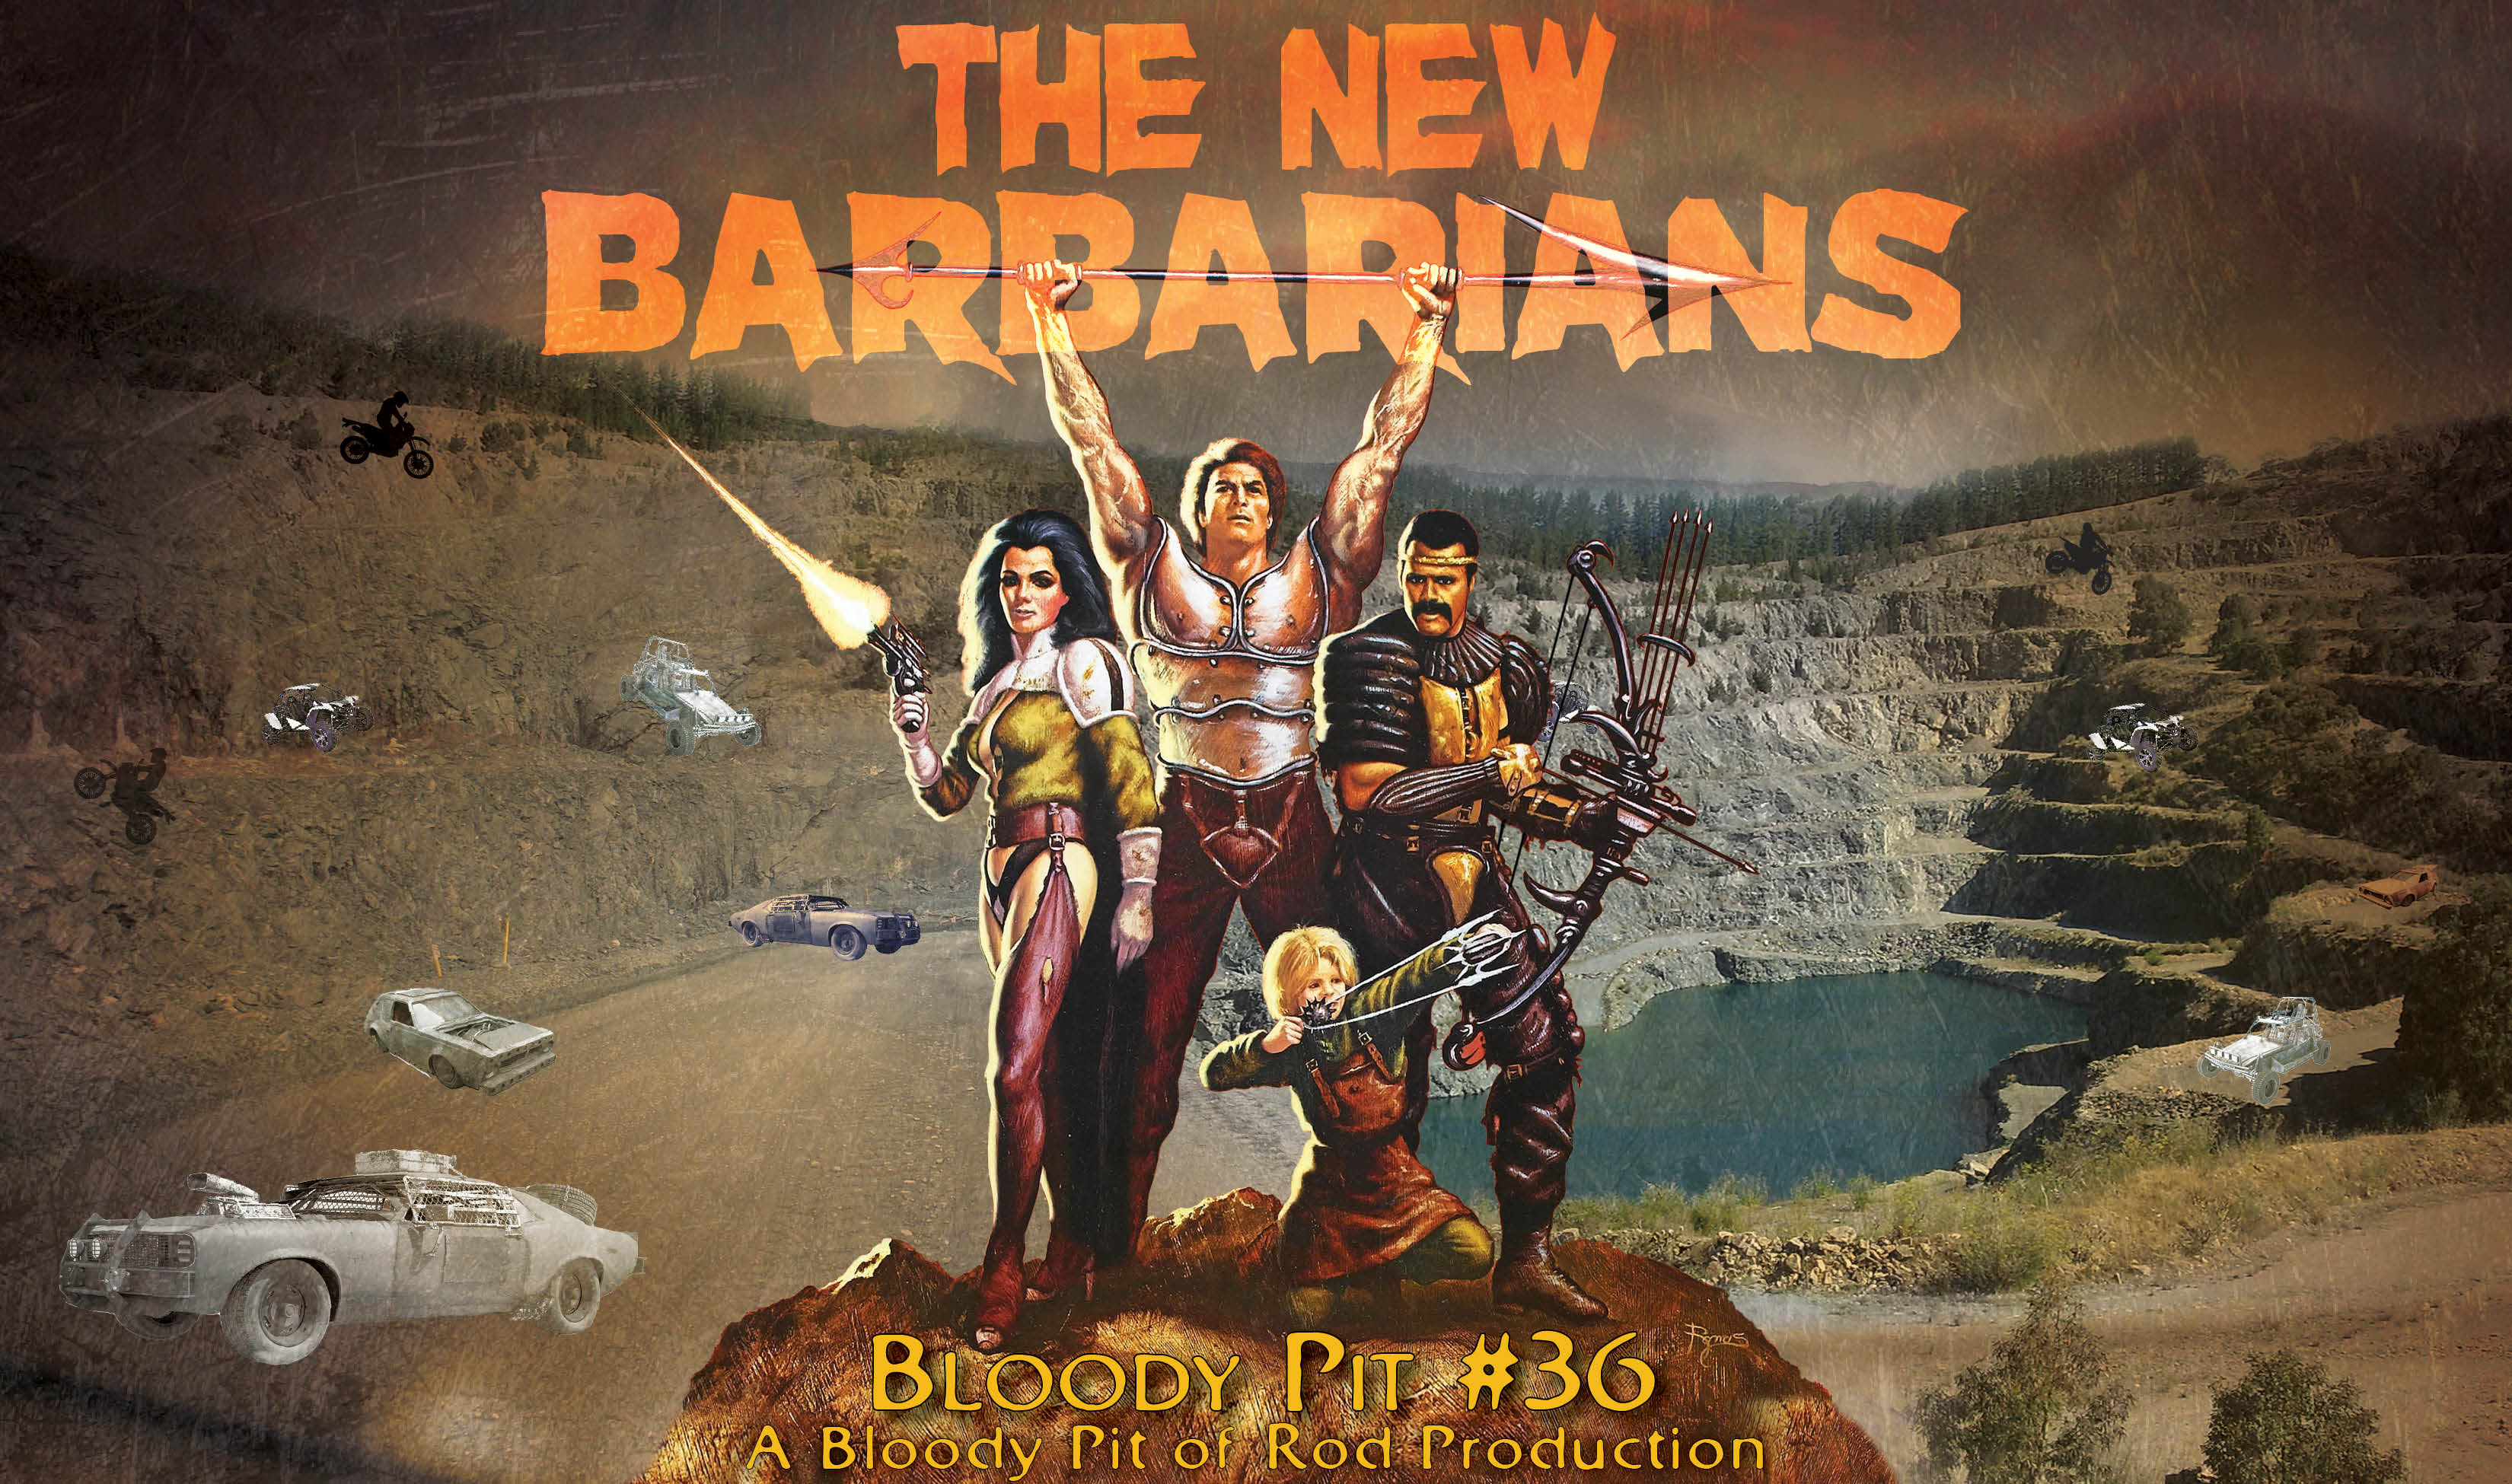 The Bloody Pit #36 - THE NEW BARBARIANS (1983) 